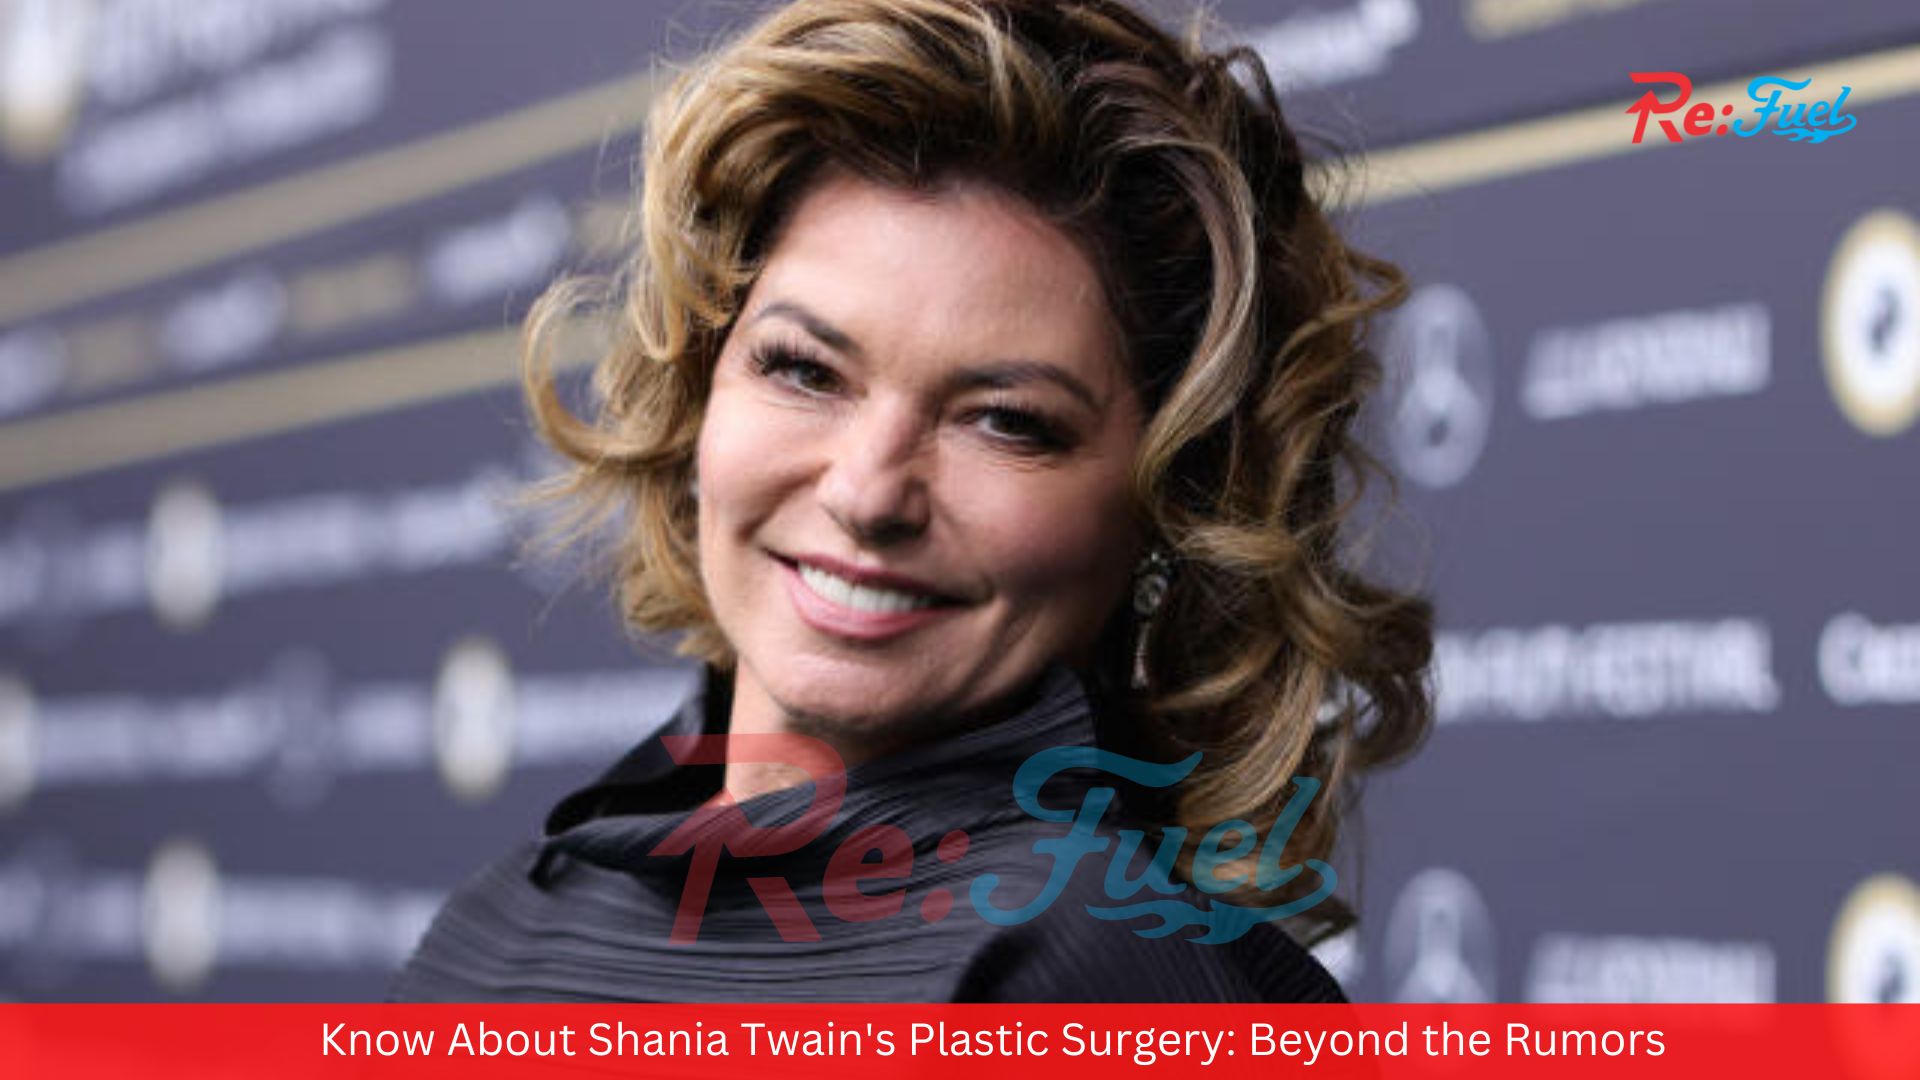 Know About Shania Twain's Plastic Surgery: Beyond the Rumors